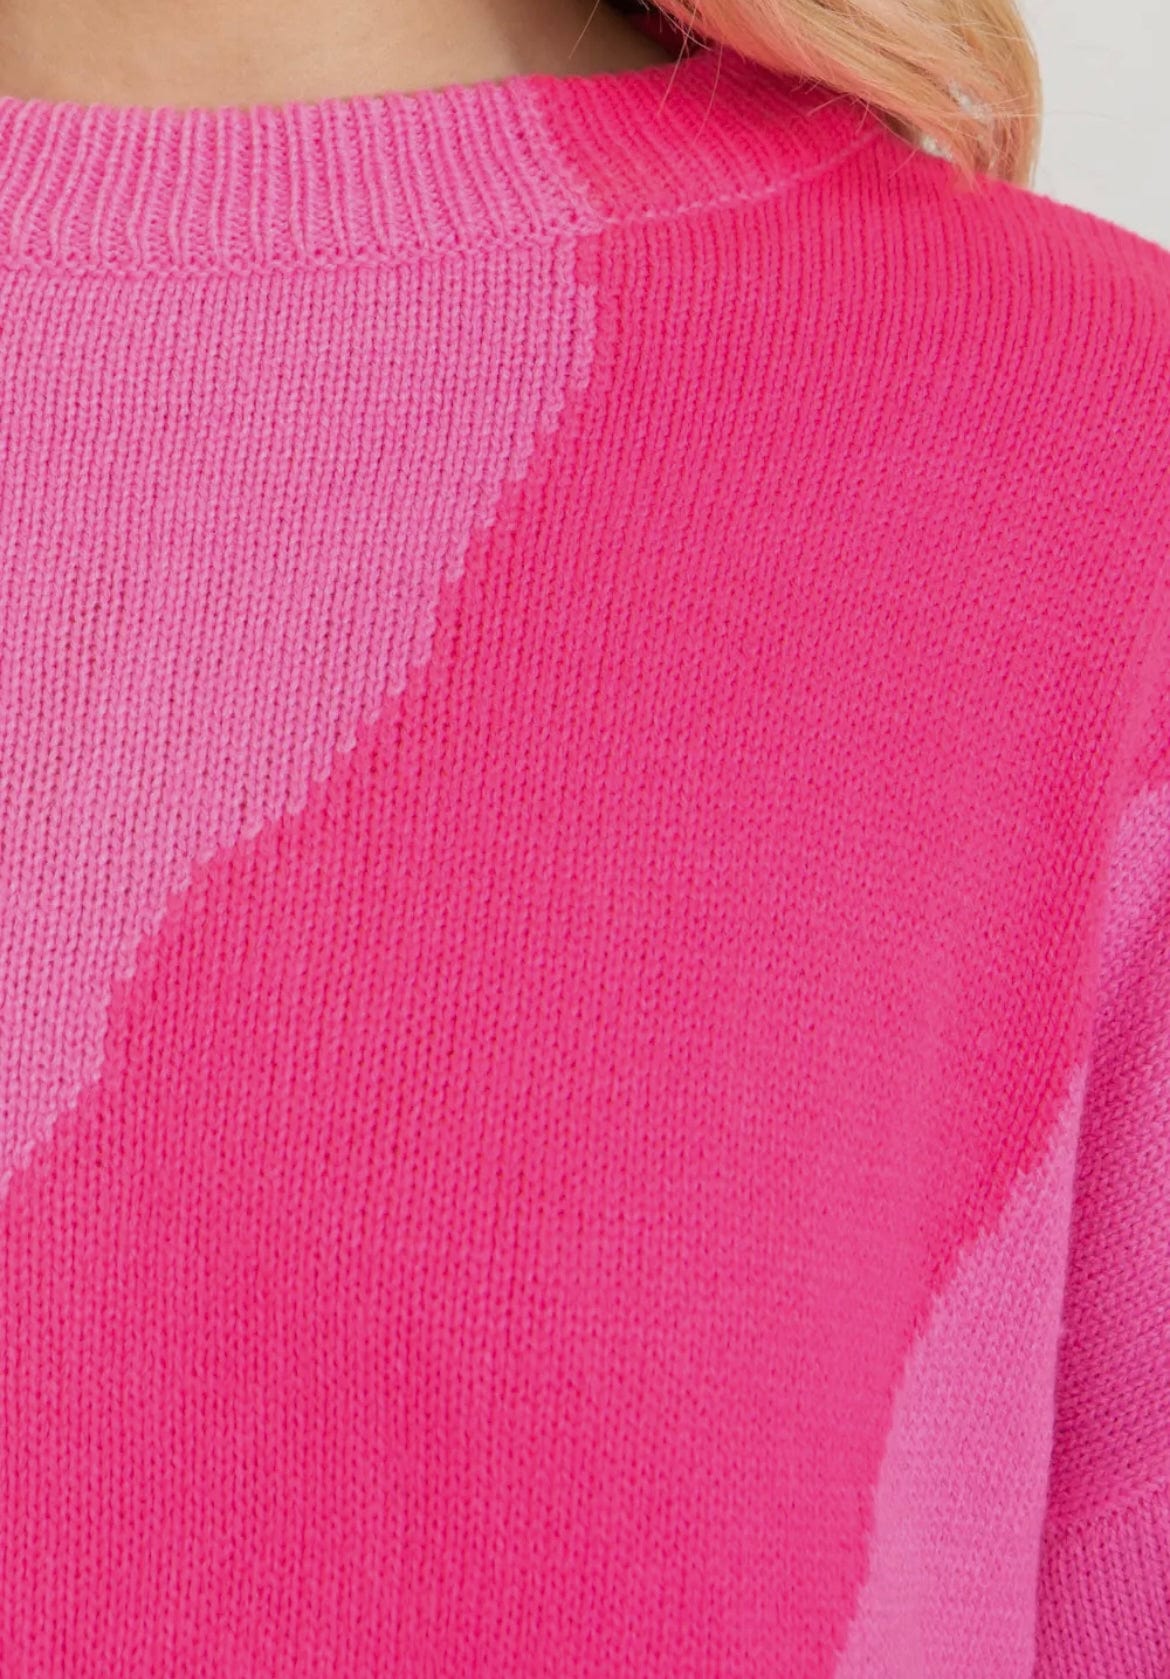 Pink Dreams Oversized Sweater